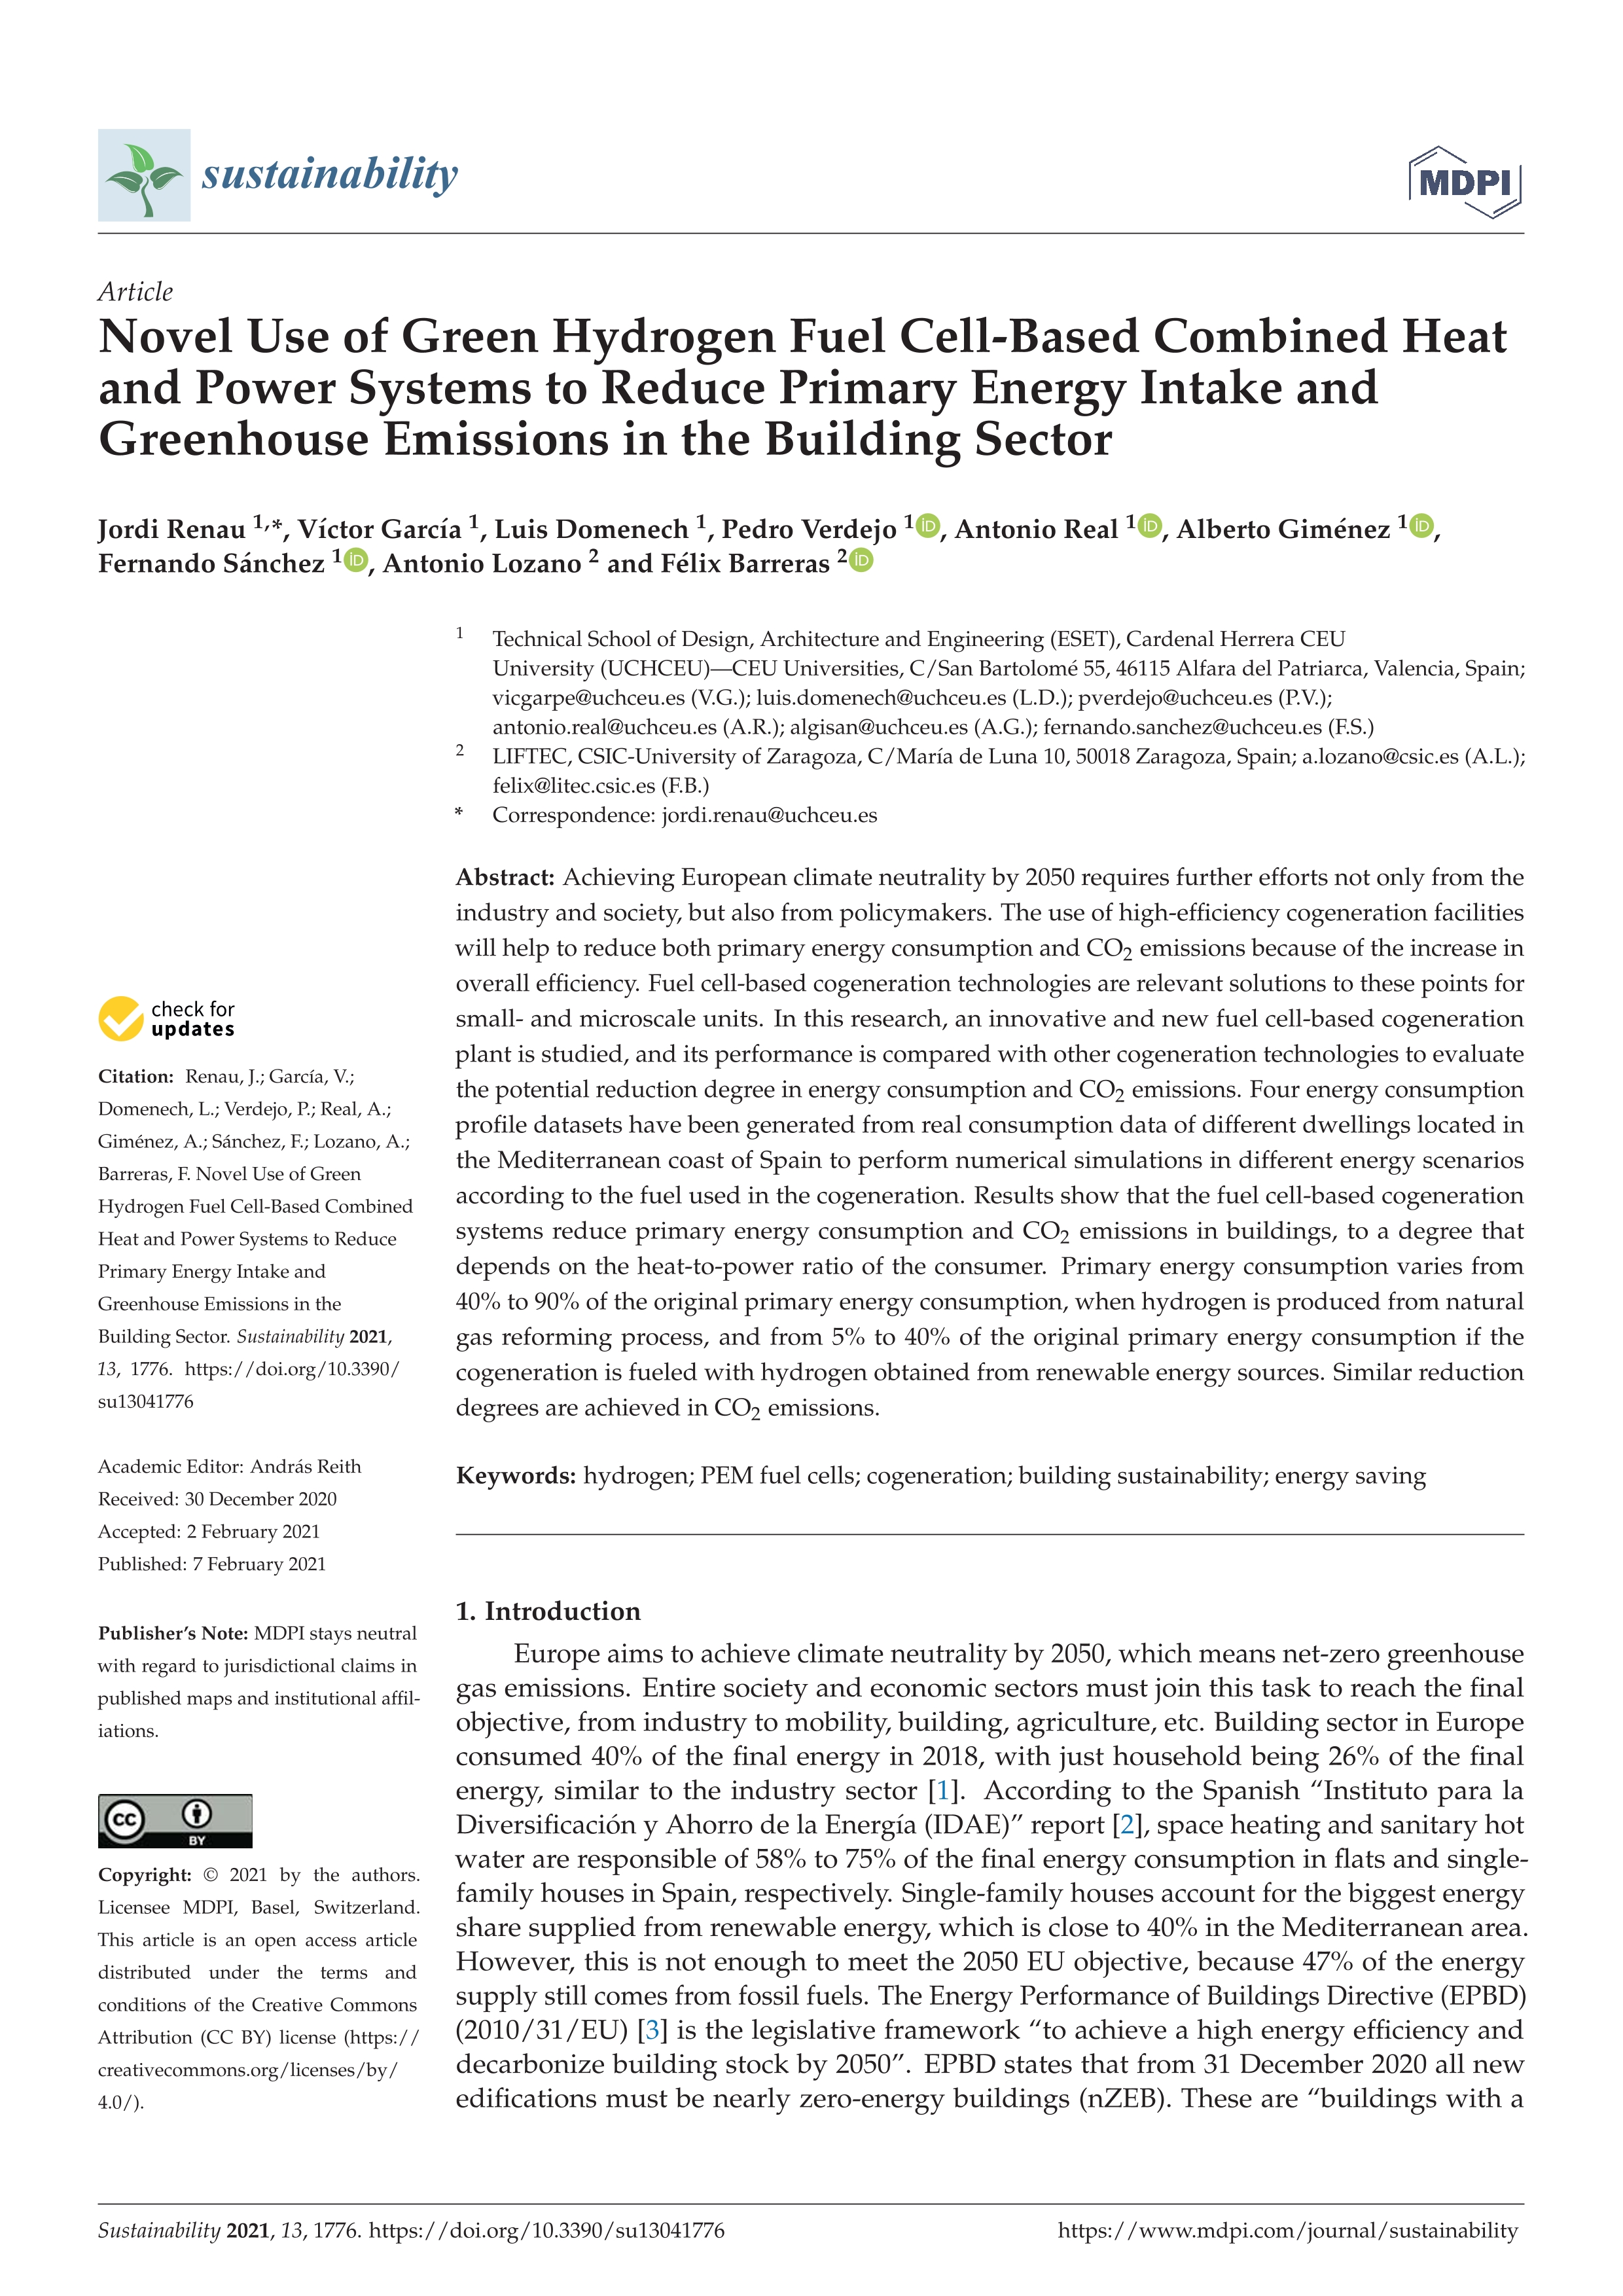 Novel Use Of Green Hydrogen Fuel Cell Based Combined Heat And Power Systems To Reduce Primary Energy Intake And Greenhouse Emiss